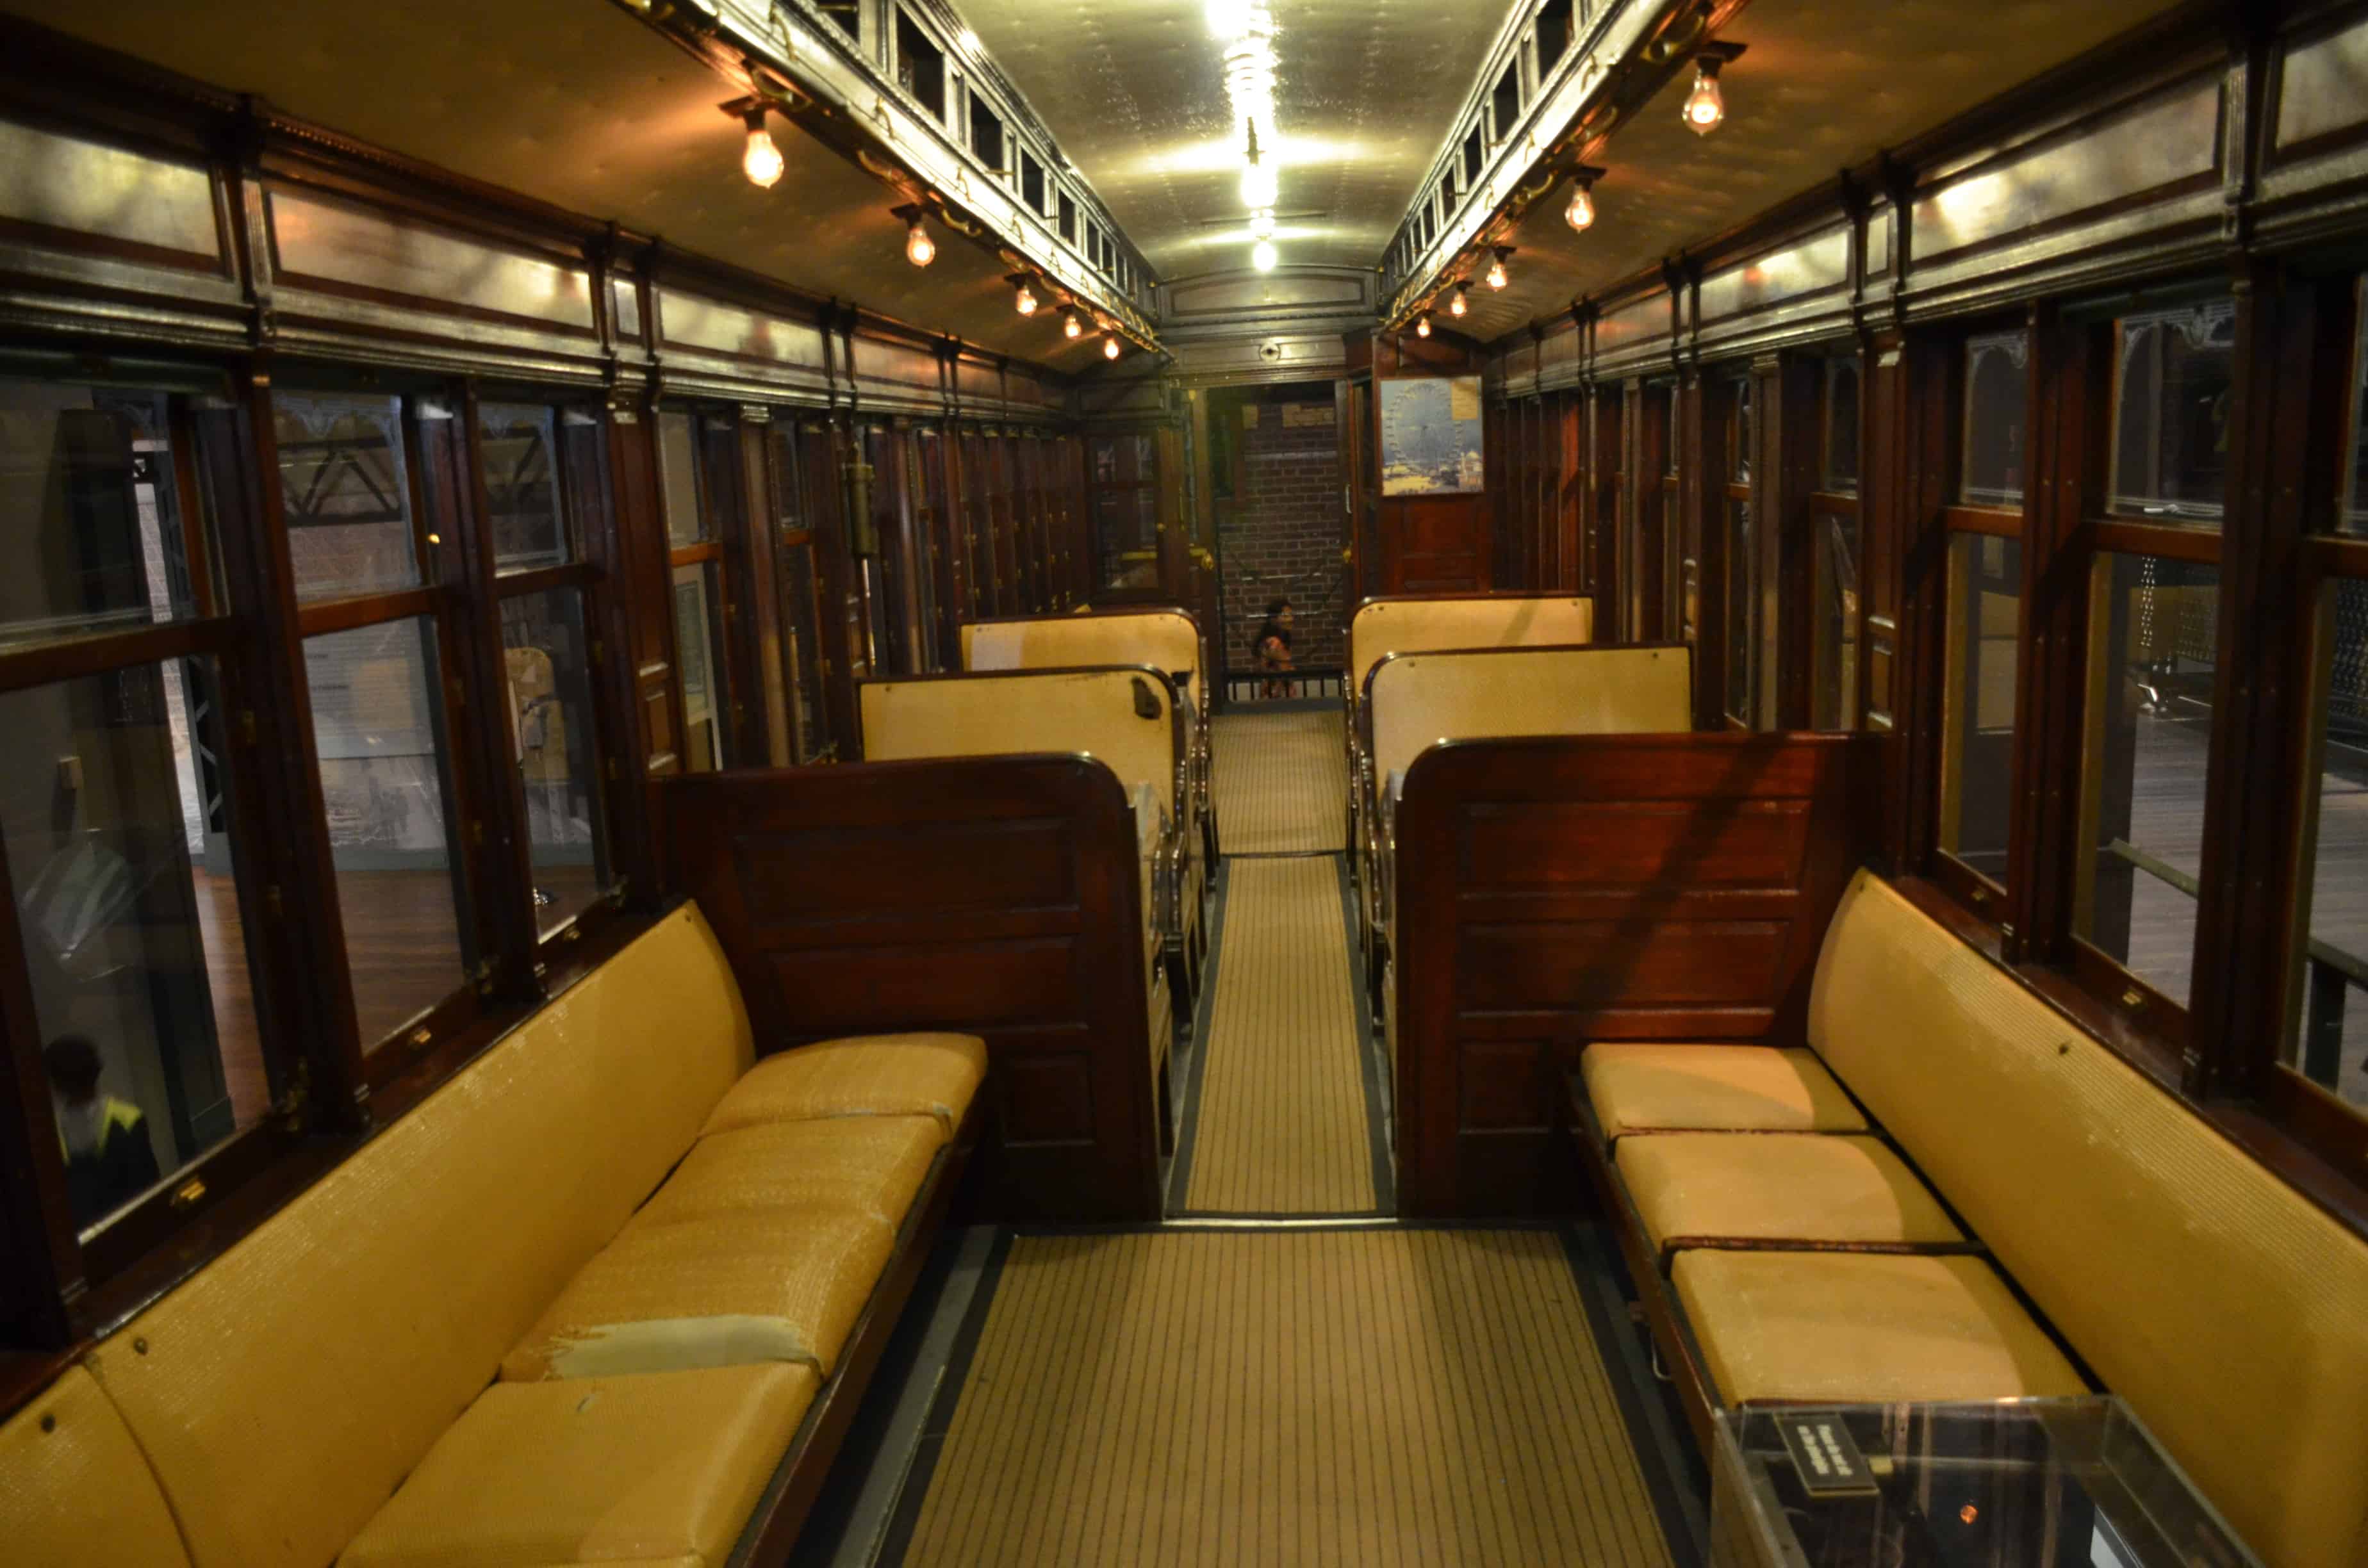 South Side Elevated Railroad car 1 at Chicago: Crossroads of America in the Chicago History Museum in Chicago, Illinois